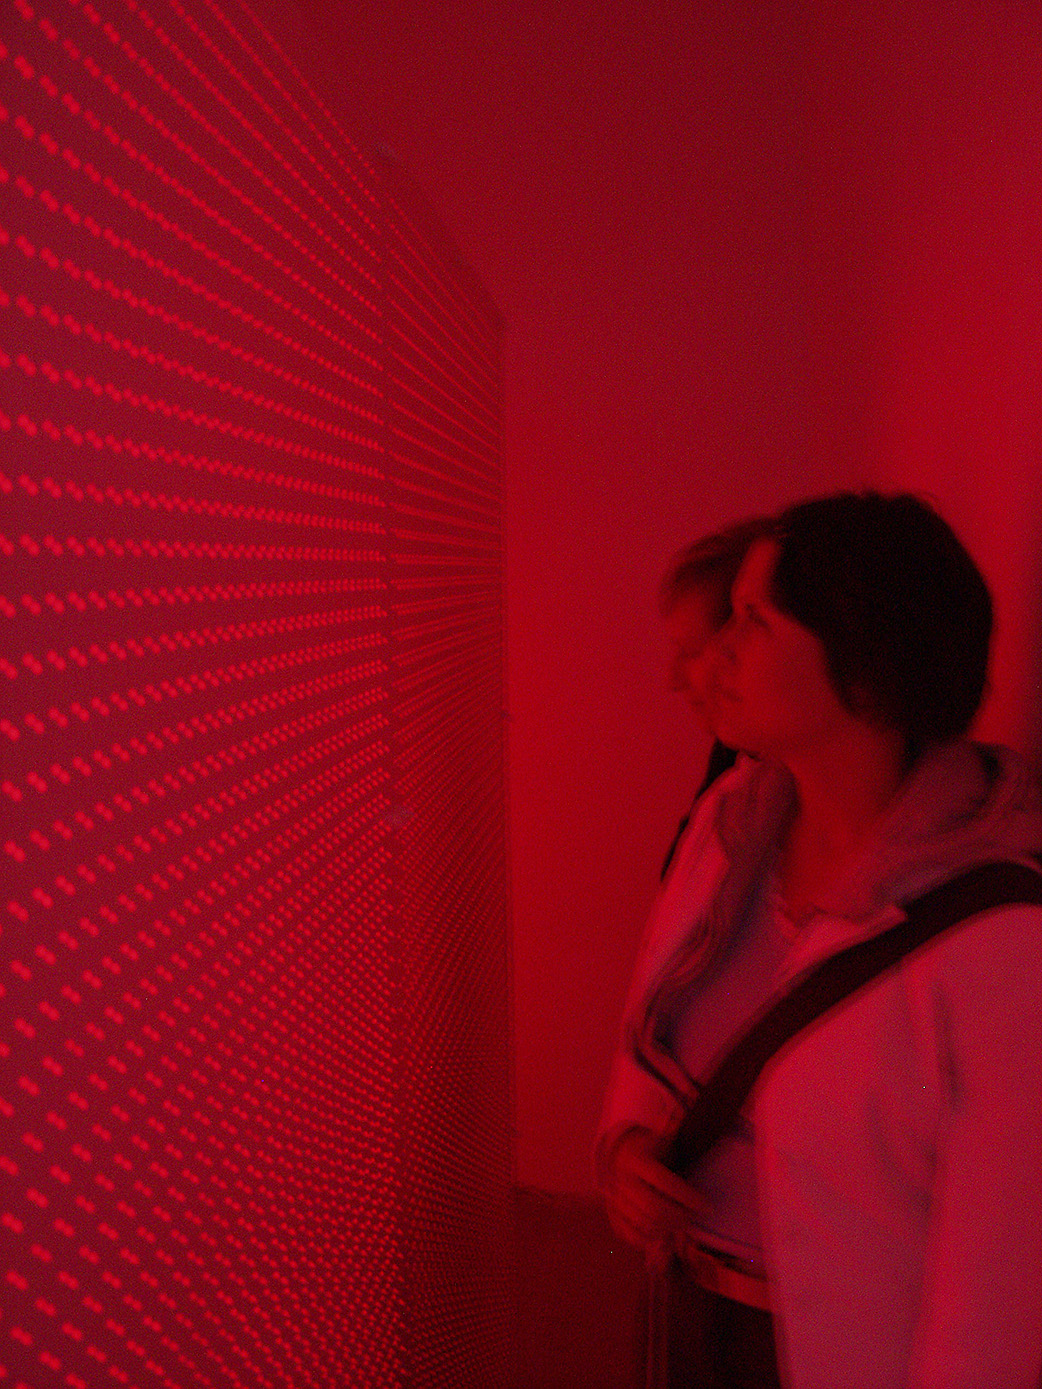 rouge cubus installation 2005 